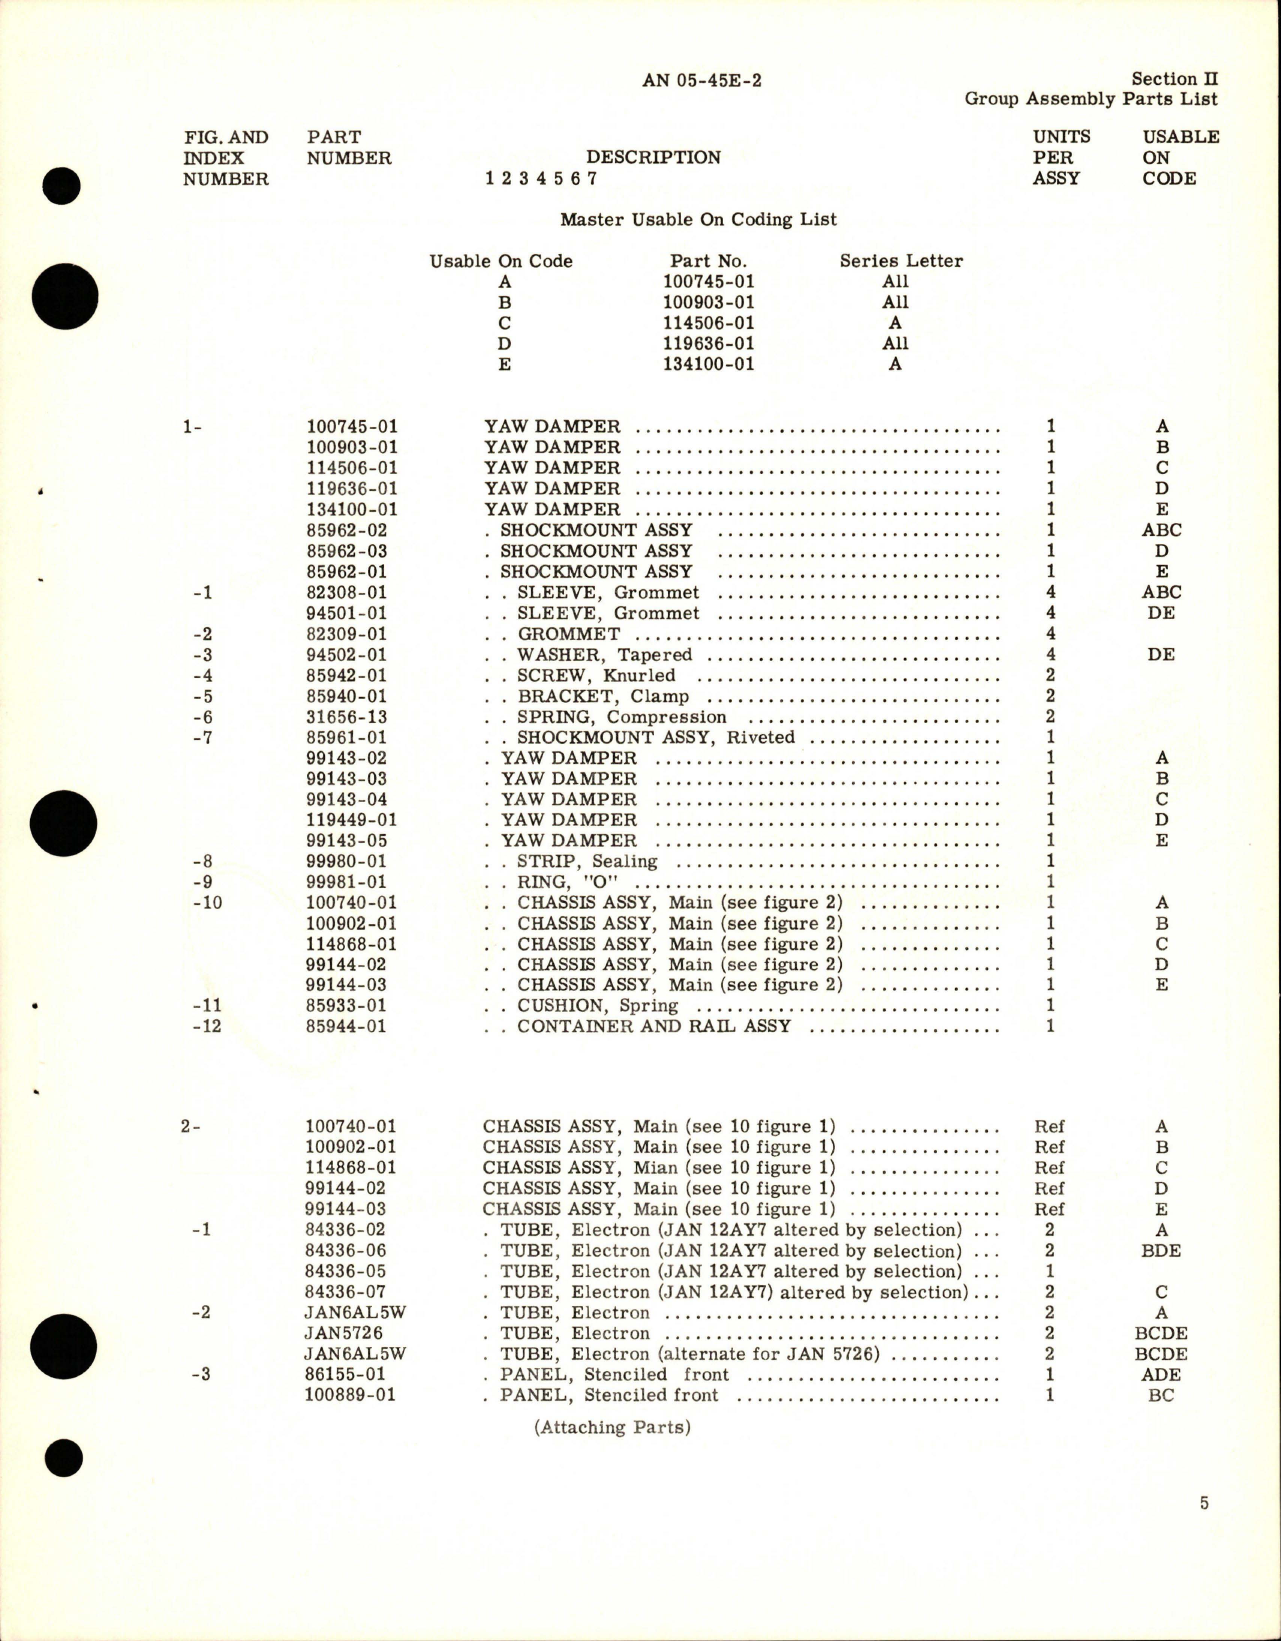 Sample page 7 from AirCorps Library document: Illustrated Parts Breakdown for Yaw Damper